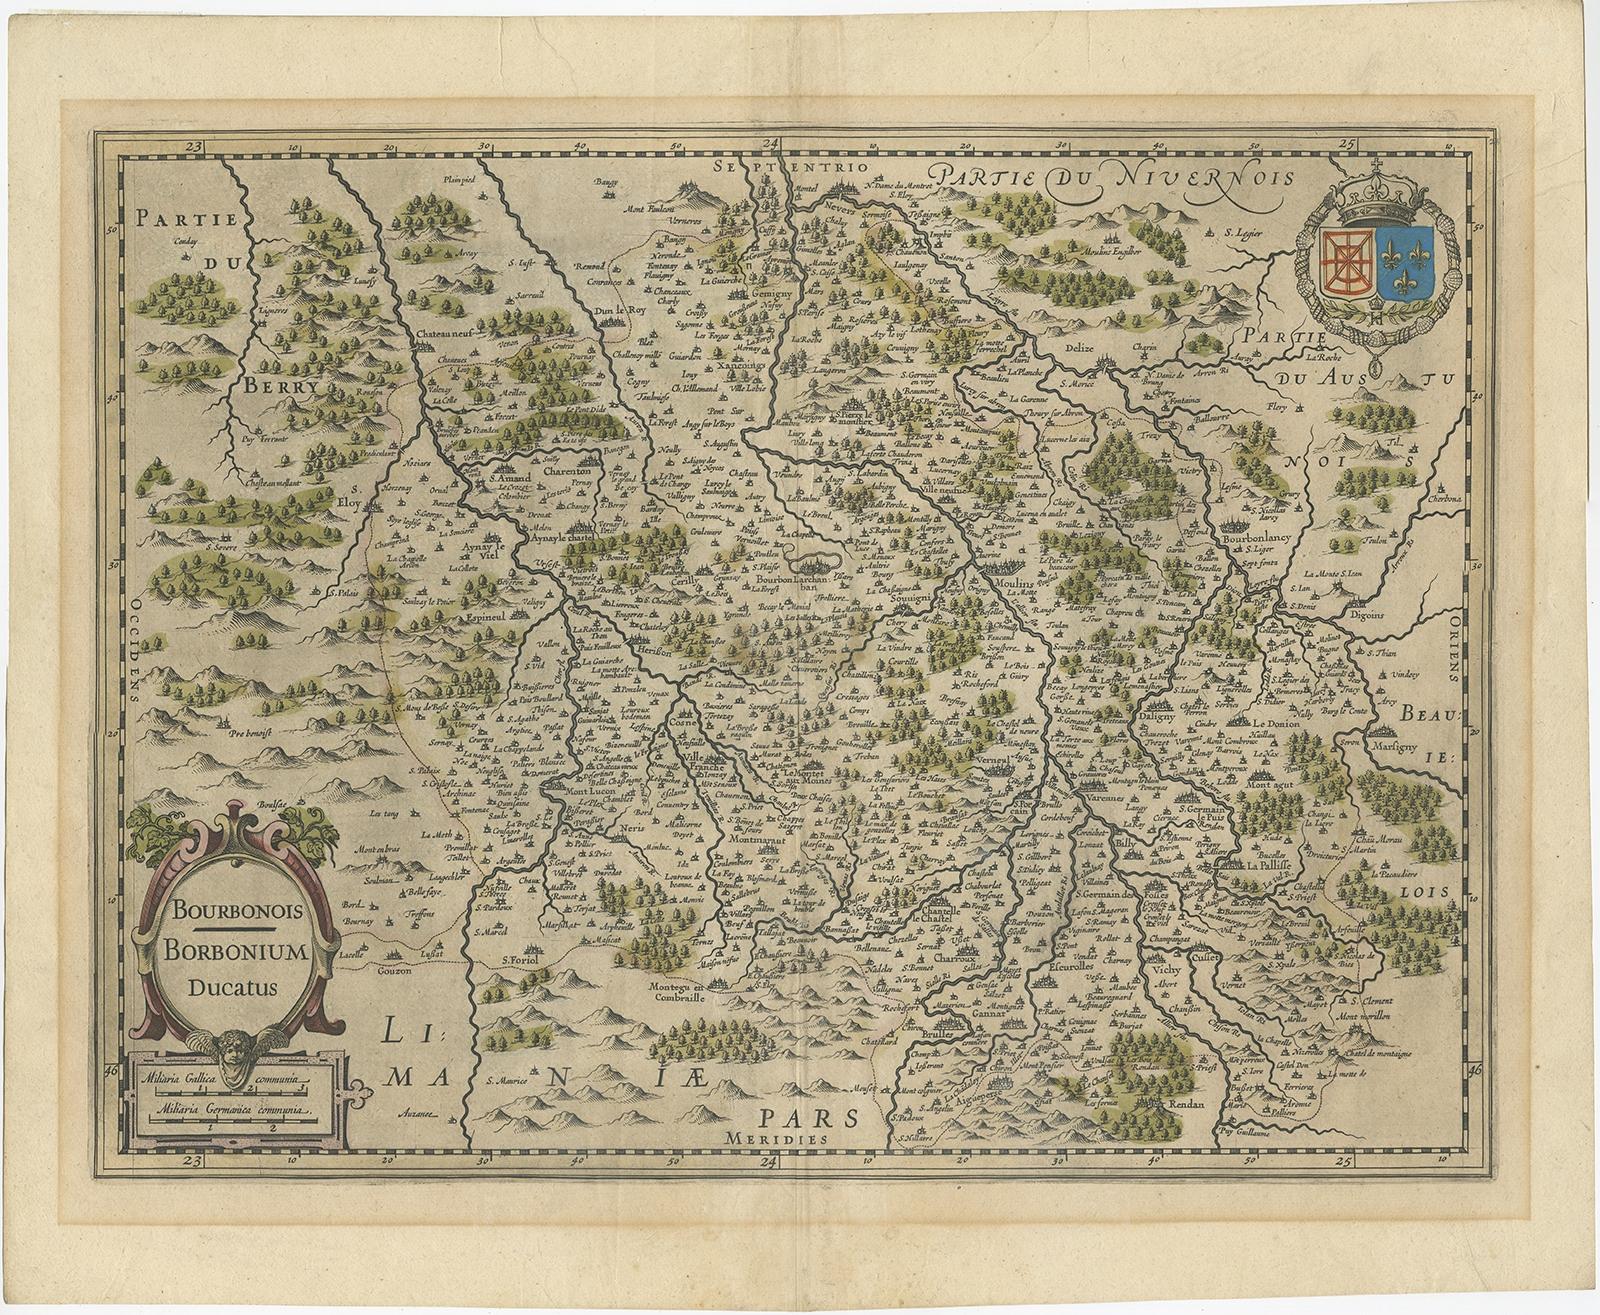 Antique map titled 'Bourbonois - Borbonium Ducatus'. 

Old map of the Bourbonnais region of France. Bourbonnais was a historic province in the centre of France that corresponds to the modern département of Allier, along with part of the